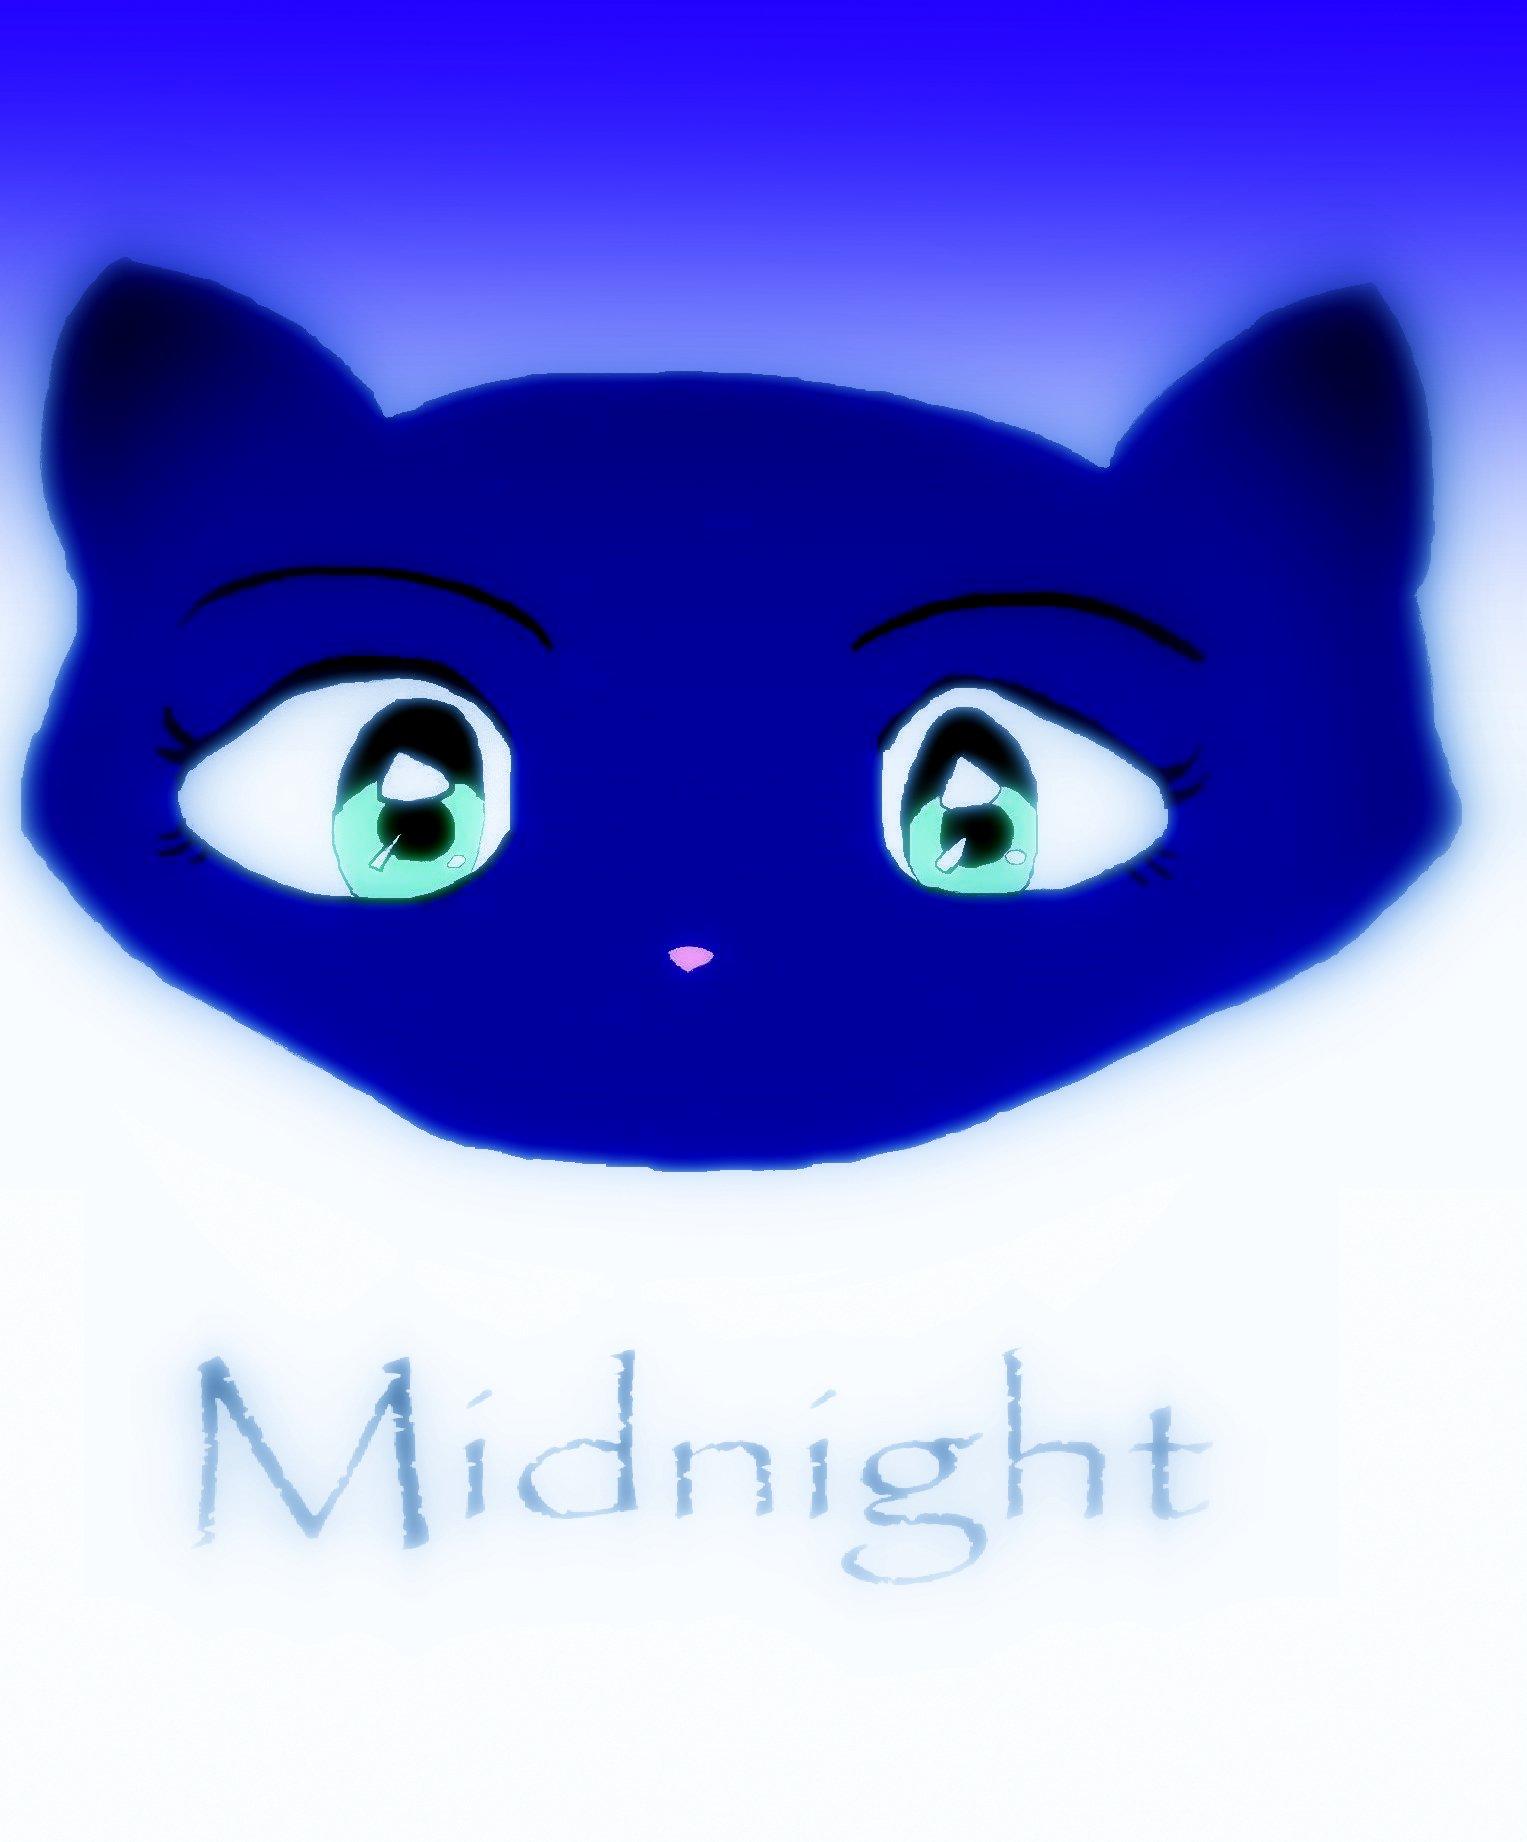 !!! Midnight Even Better !!! by meowsers